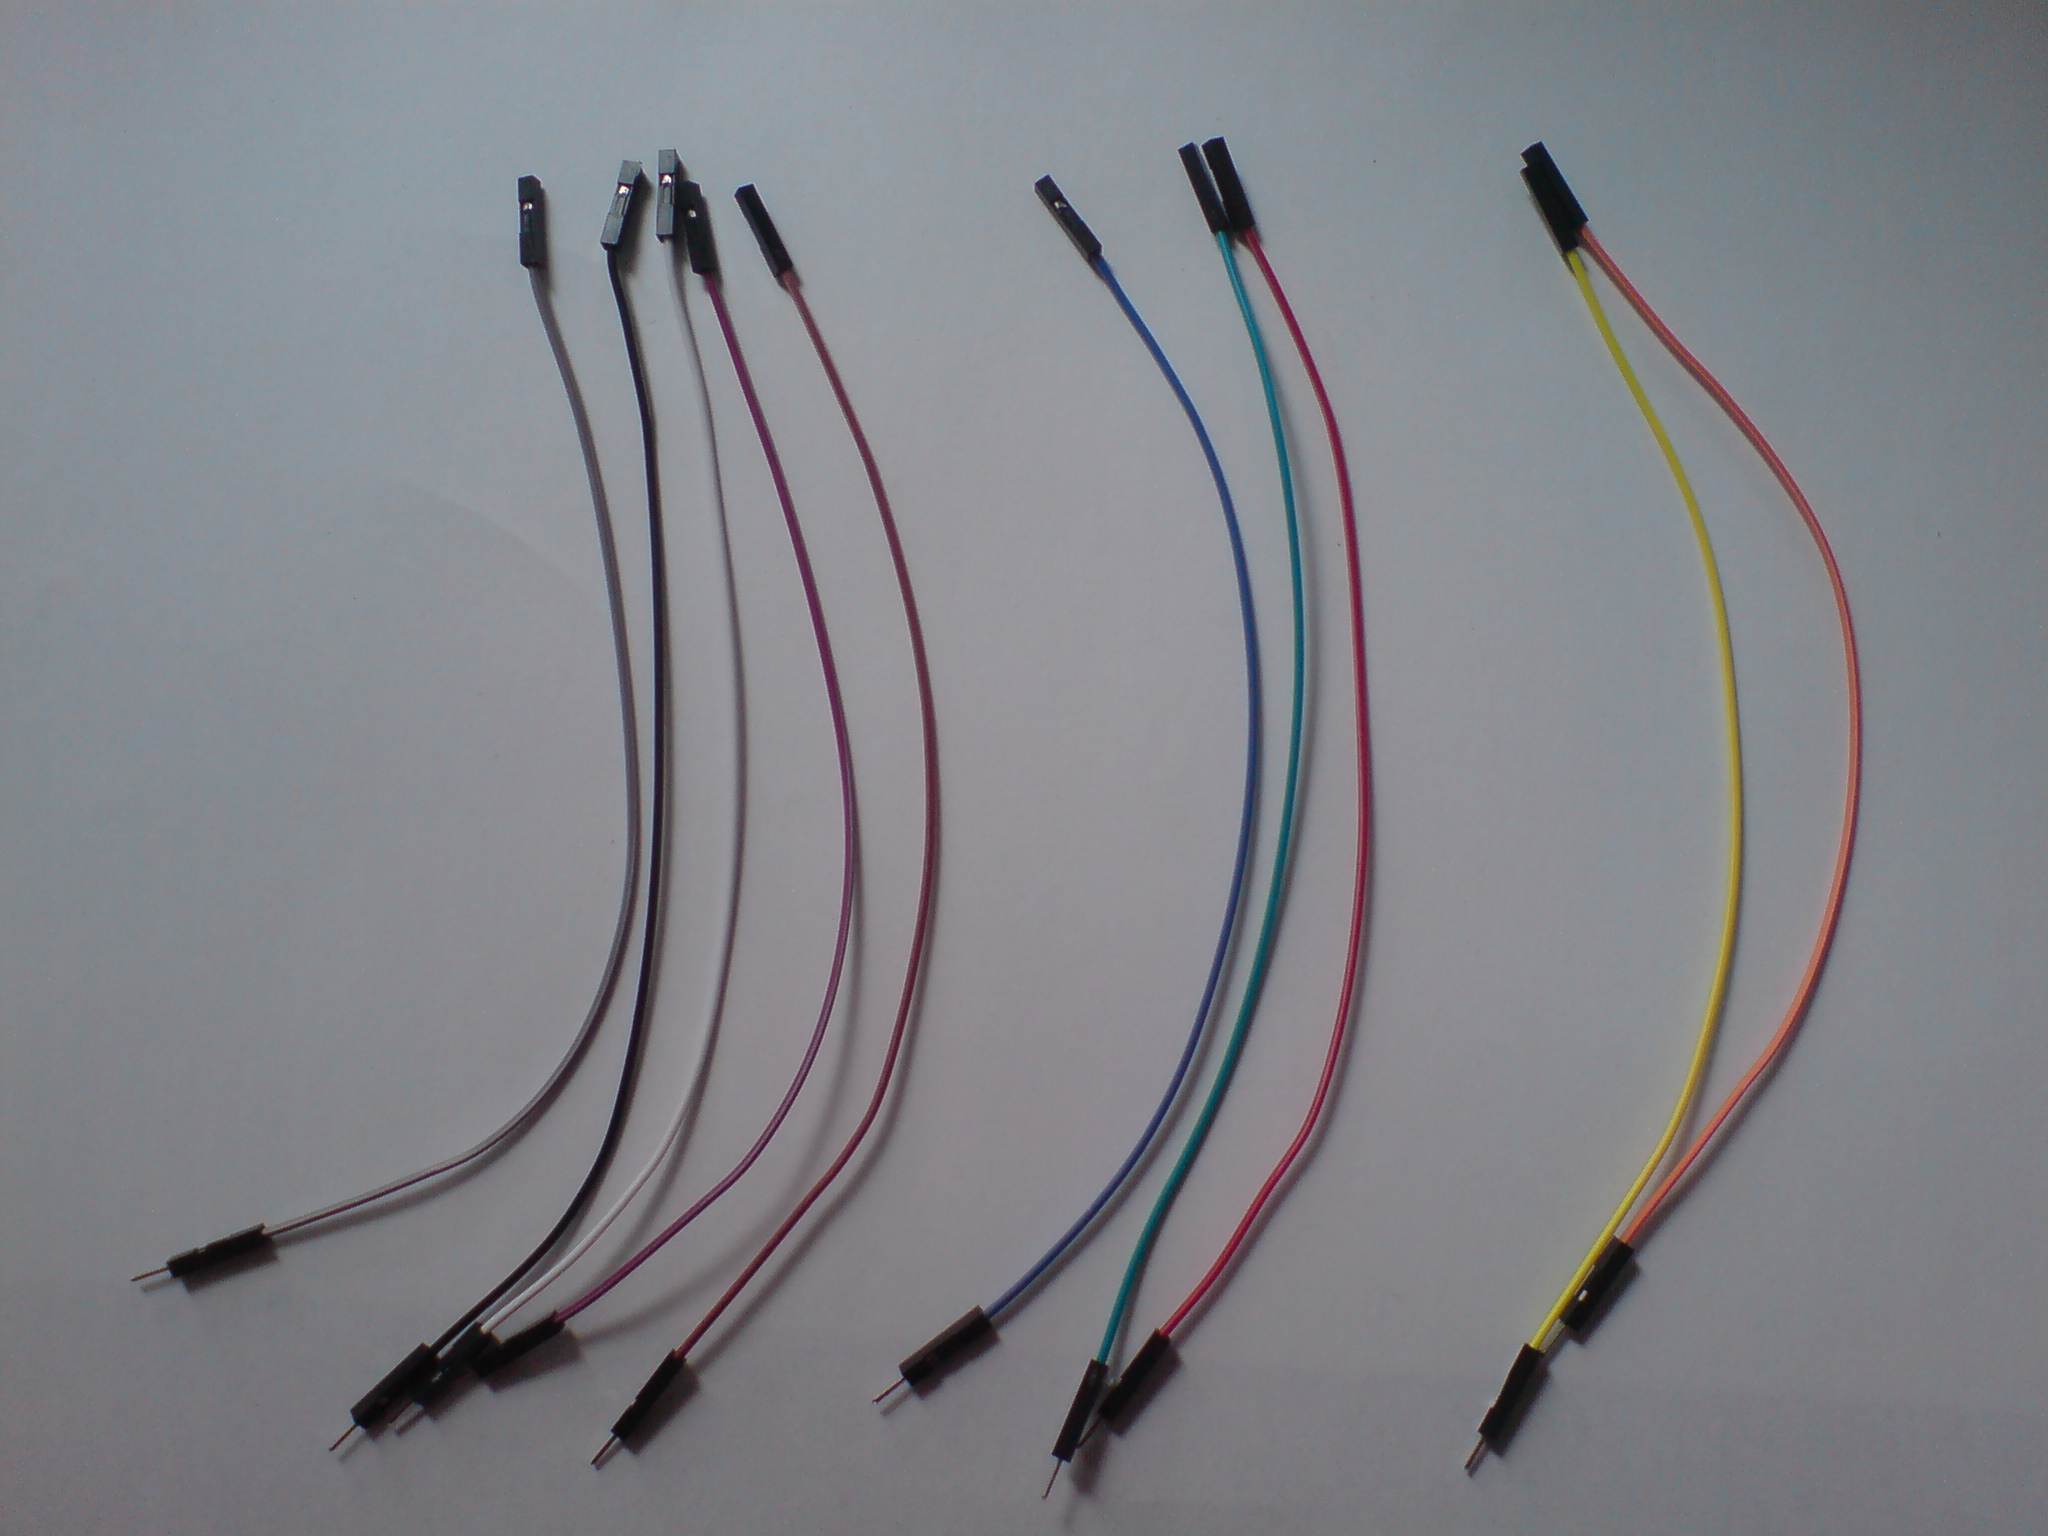 Each socket requires 10 male-to-female wires